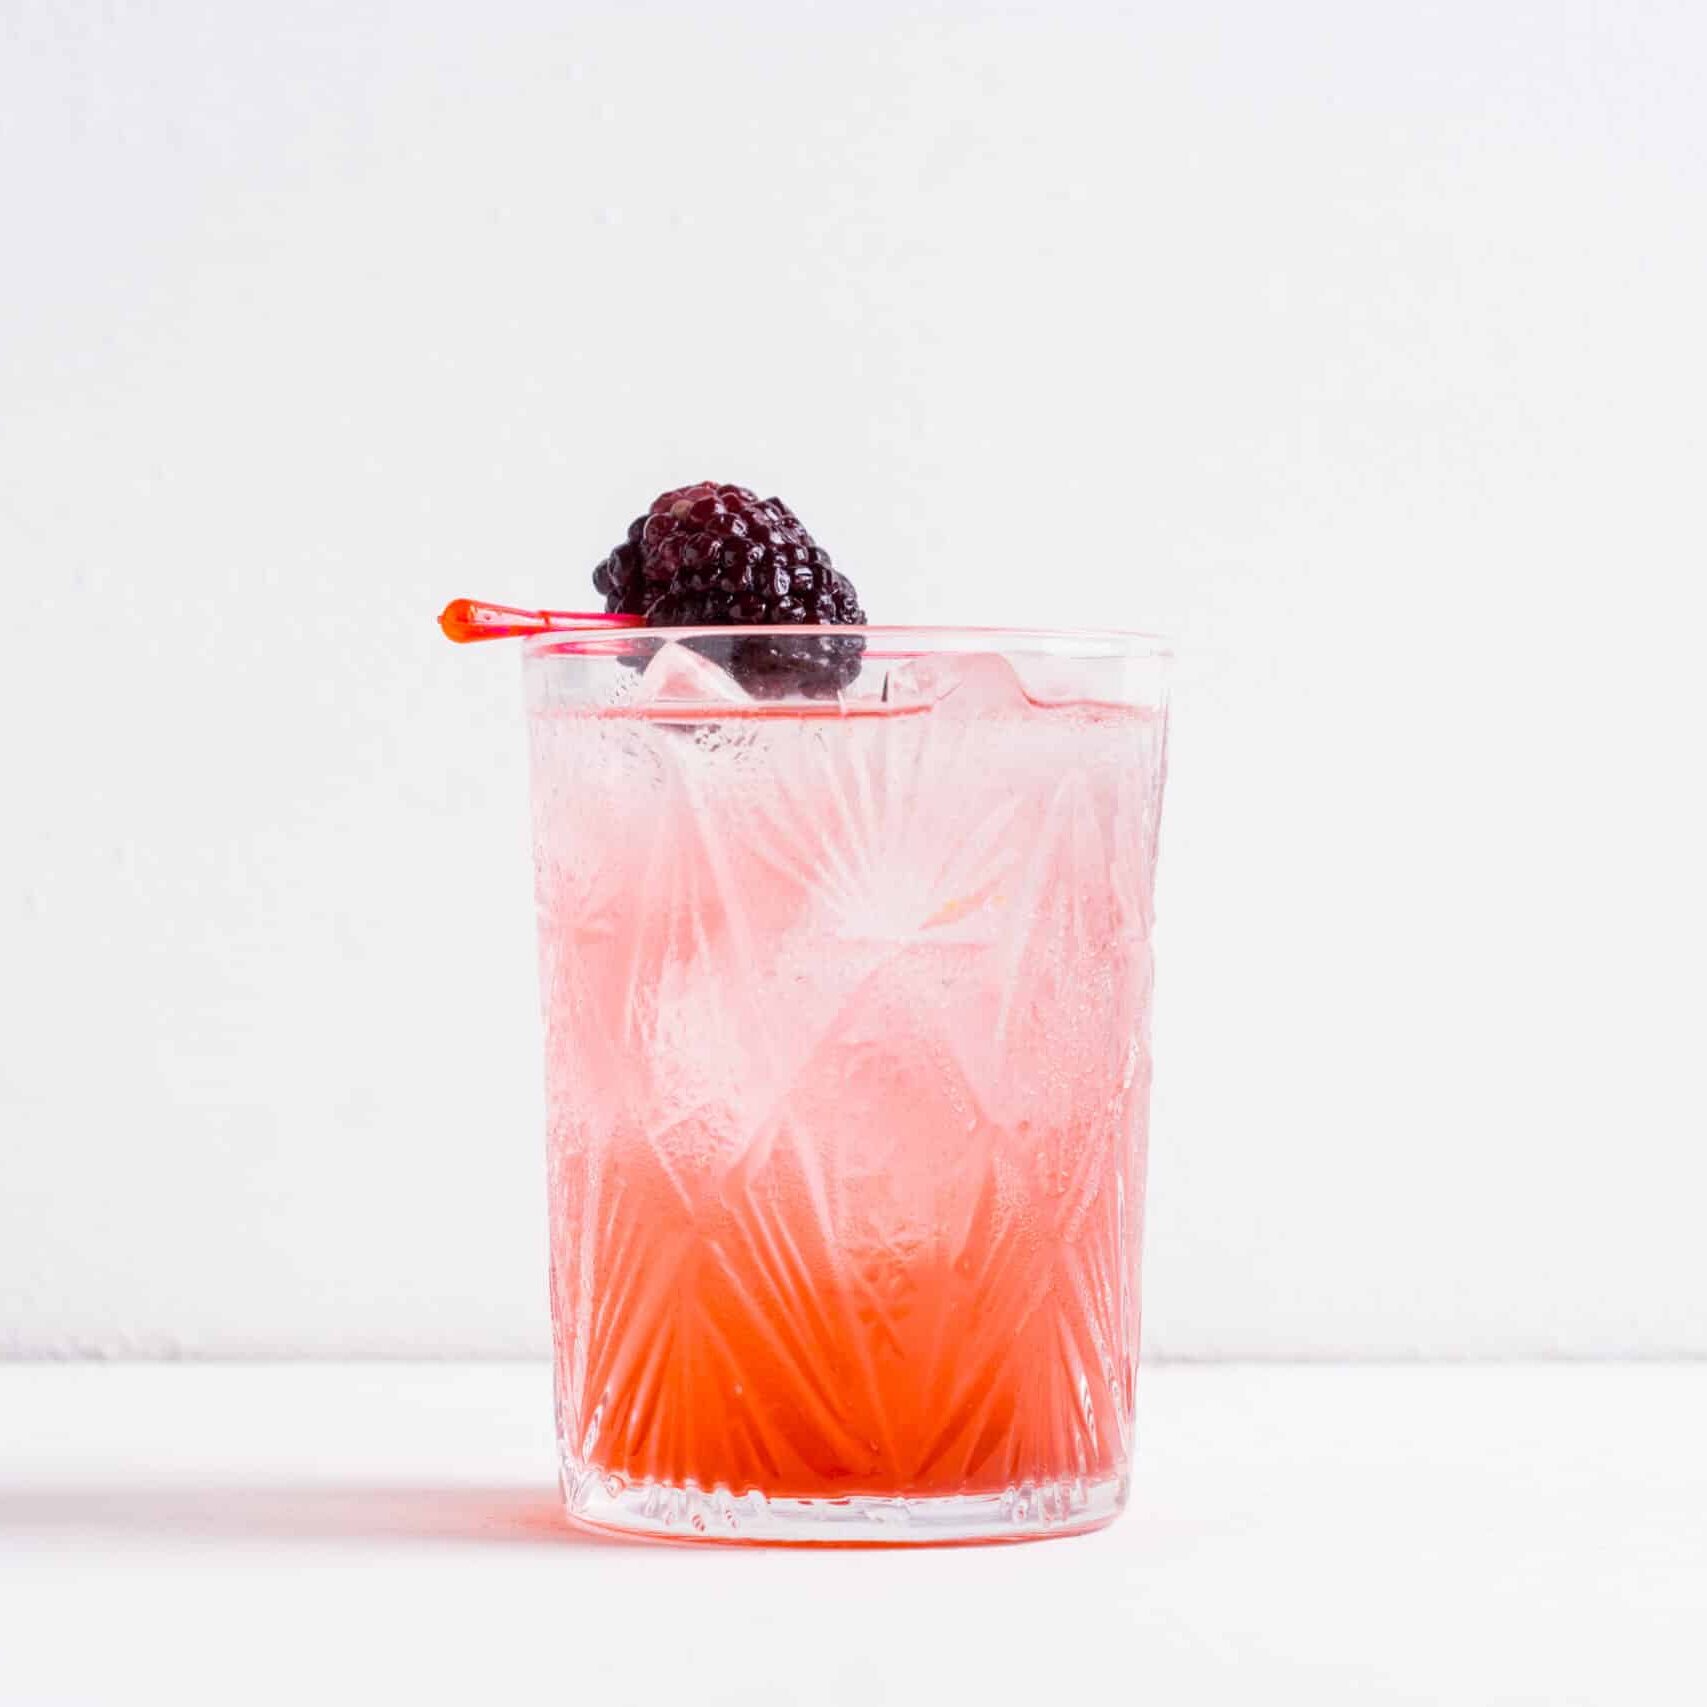 Blackberry cocktail on the wooden background